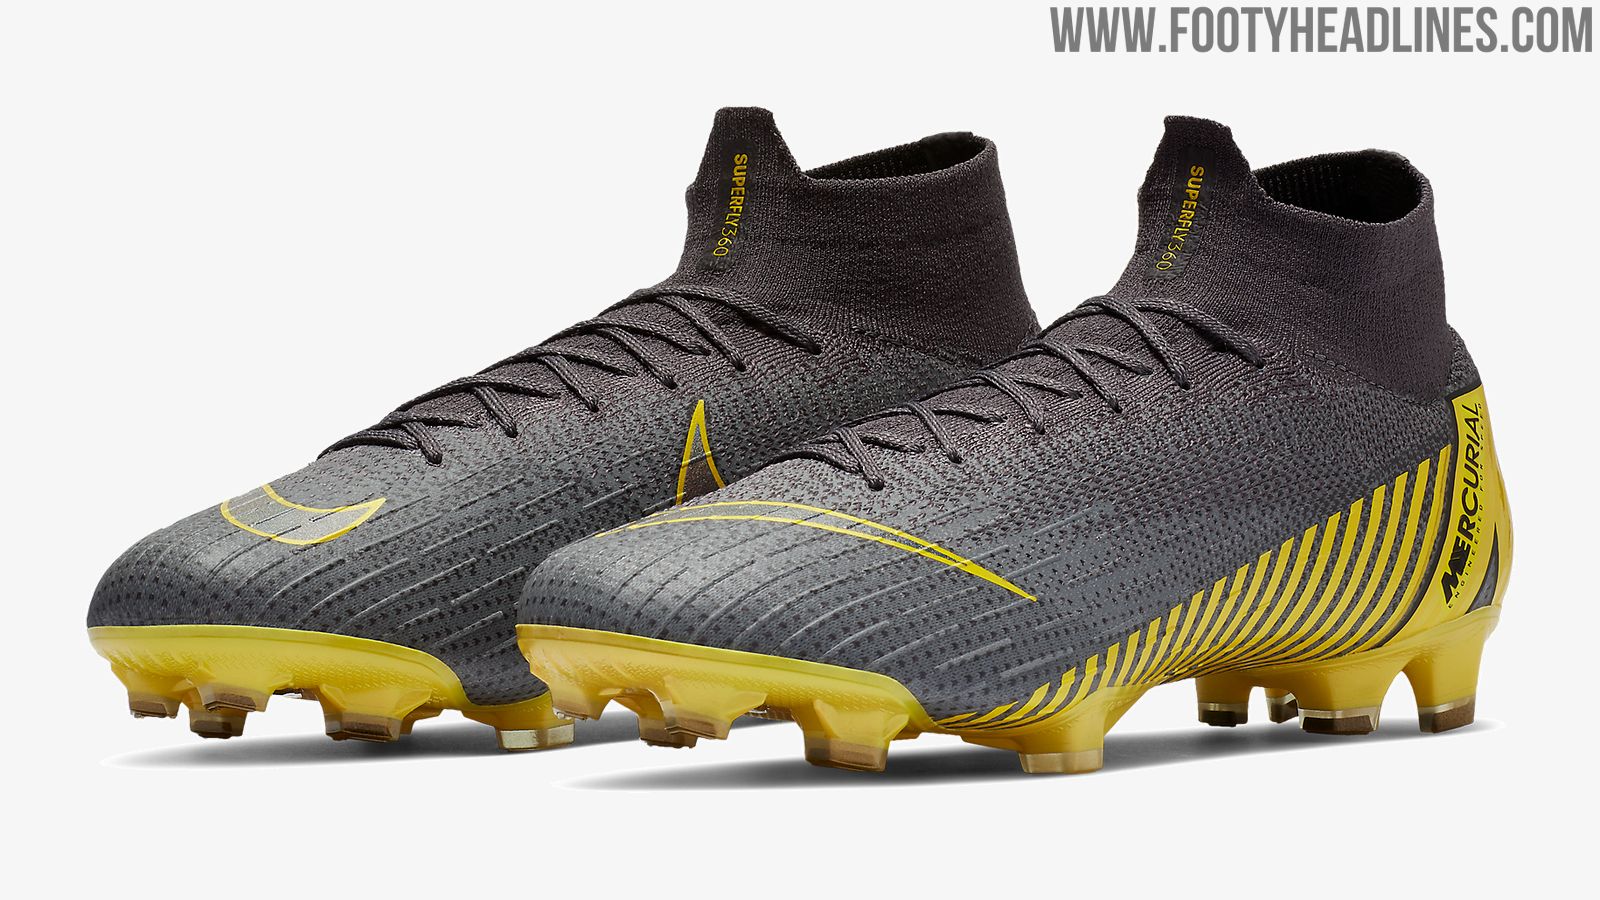 Nike Mercurial Superfly 6 and Vapor 12 'Game Over' Boots Released Footy Headlines